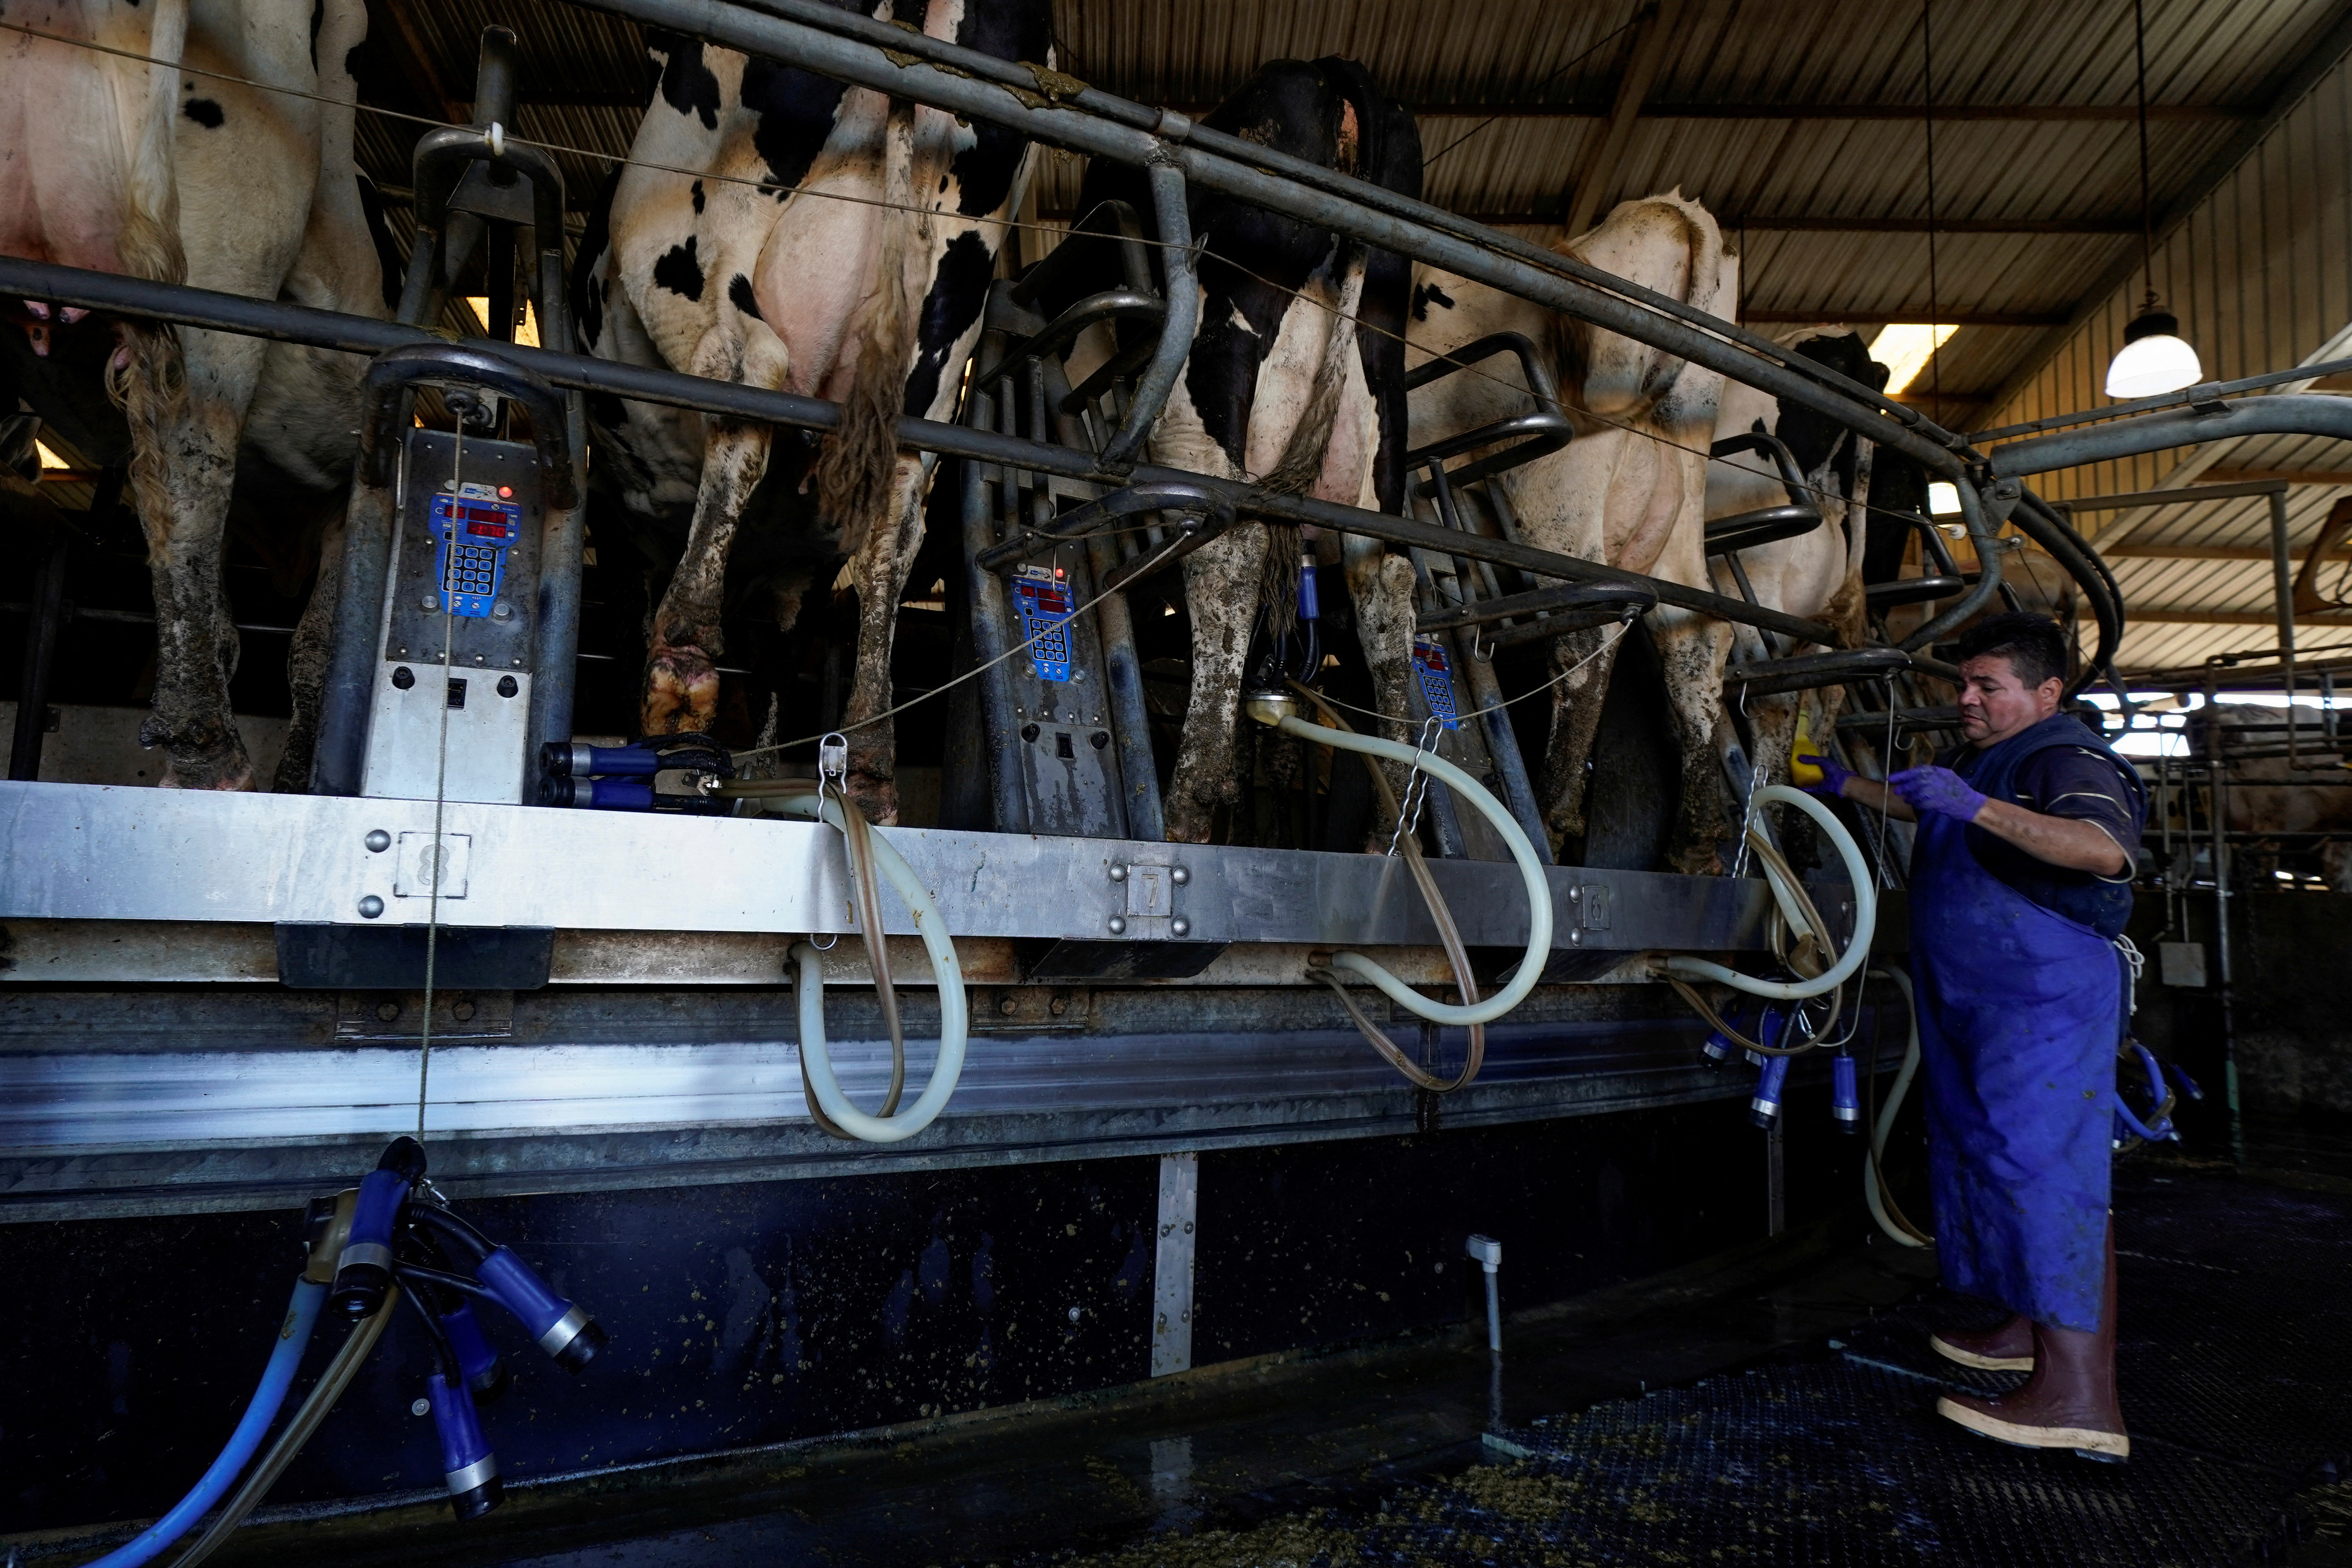 Automation is used as a worker helps milk Holstein cows